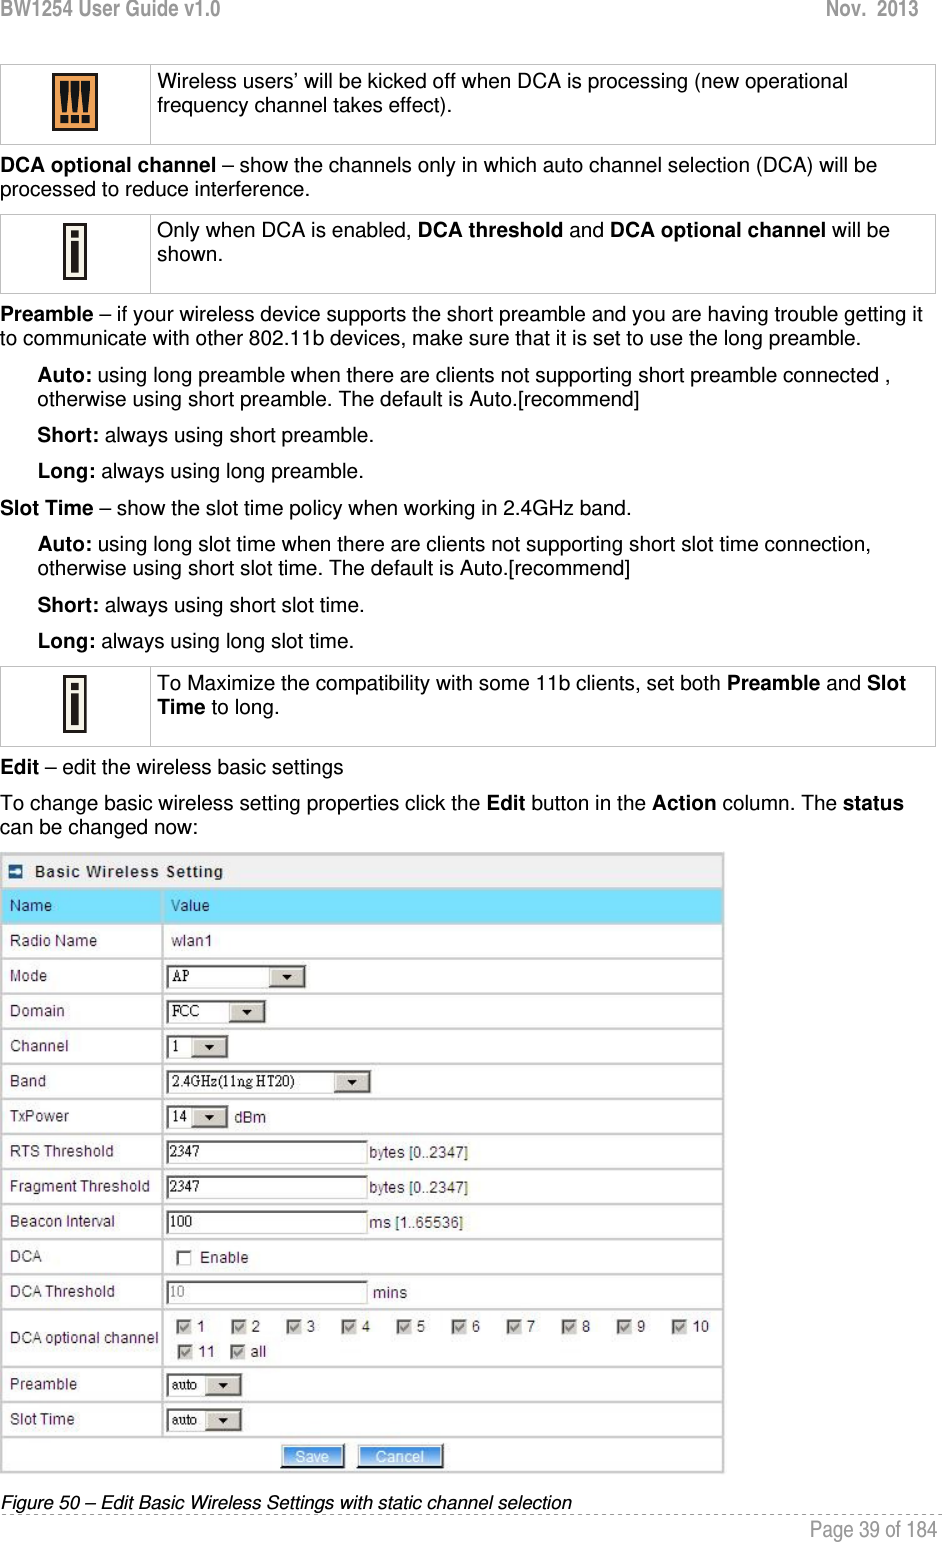 BW1254 User Guide v1.0  Nov.  2013     Page 39 of 184    Wireless users’ will be kicked off when DCA is processing (new operational frequency channel takes effect).  DCA optional channel – show the channels only in which auto channel selection (DCA) will be processed to reduce interference.  Only when DCA is enabled, DCA threshold and DCA optional channel will be shown.  Preamble – if your wireless device supports the short preamble and you are having trouble getting it to communicate with other 802.11b devices, make sure that it is set to use the long preamble. Auto: using long preamble when there are clients not supporting short preamble connected , otherwise using short preamble. The default is Auto.[recommend] Short: always using short preamble. Long: always using long preamble. Slot Time – show the slot time policy when working in 2.4GHz band. Auto: using long slot time when there are clients not supporting short slot time connection, otherwise using short slot time. The default is Auto.[recommend] Short: always using short slot time. Long: always using long slot time.  To Maximize the compatibility with some 11b clients, set both Preamble and Slot Time to long. Edit – edit the wireless basic settings To change basic wireless setting properties click the Edit button in the Action column. The status can be changed now:  Figure 50 – Edit Basic Wireless Settings with static channel selection 